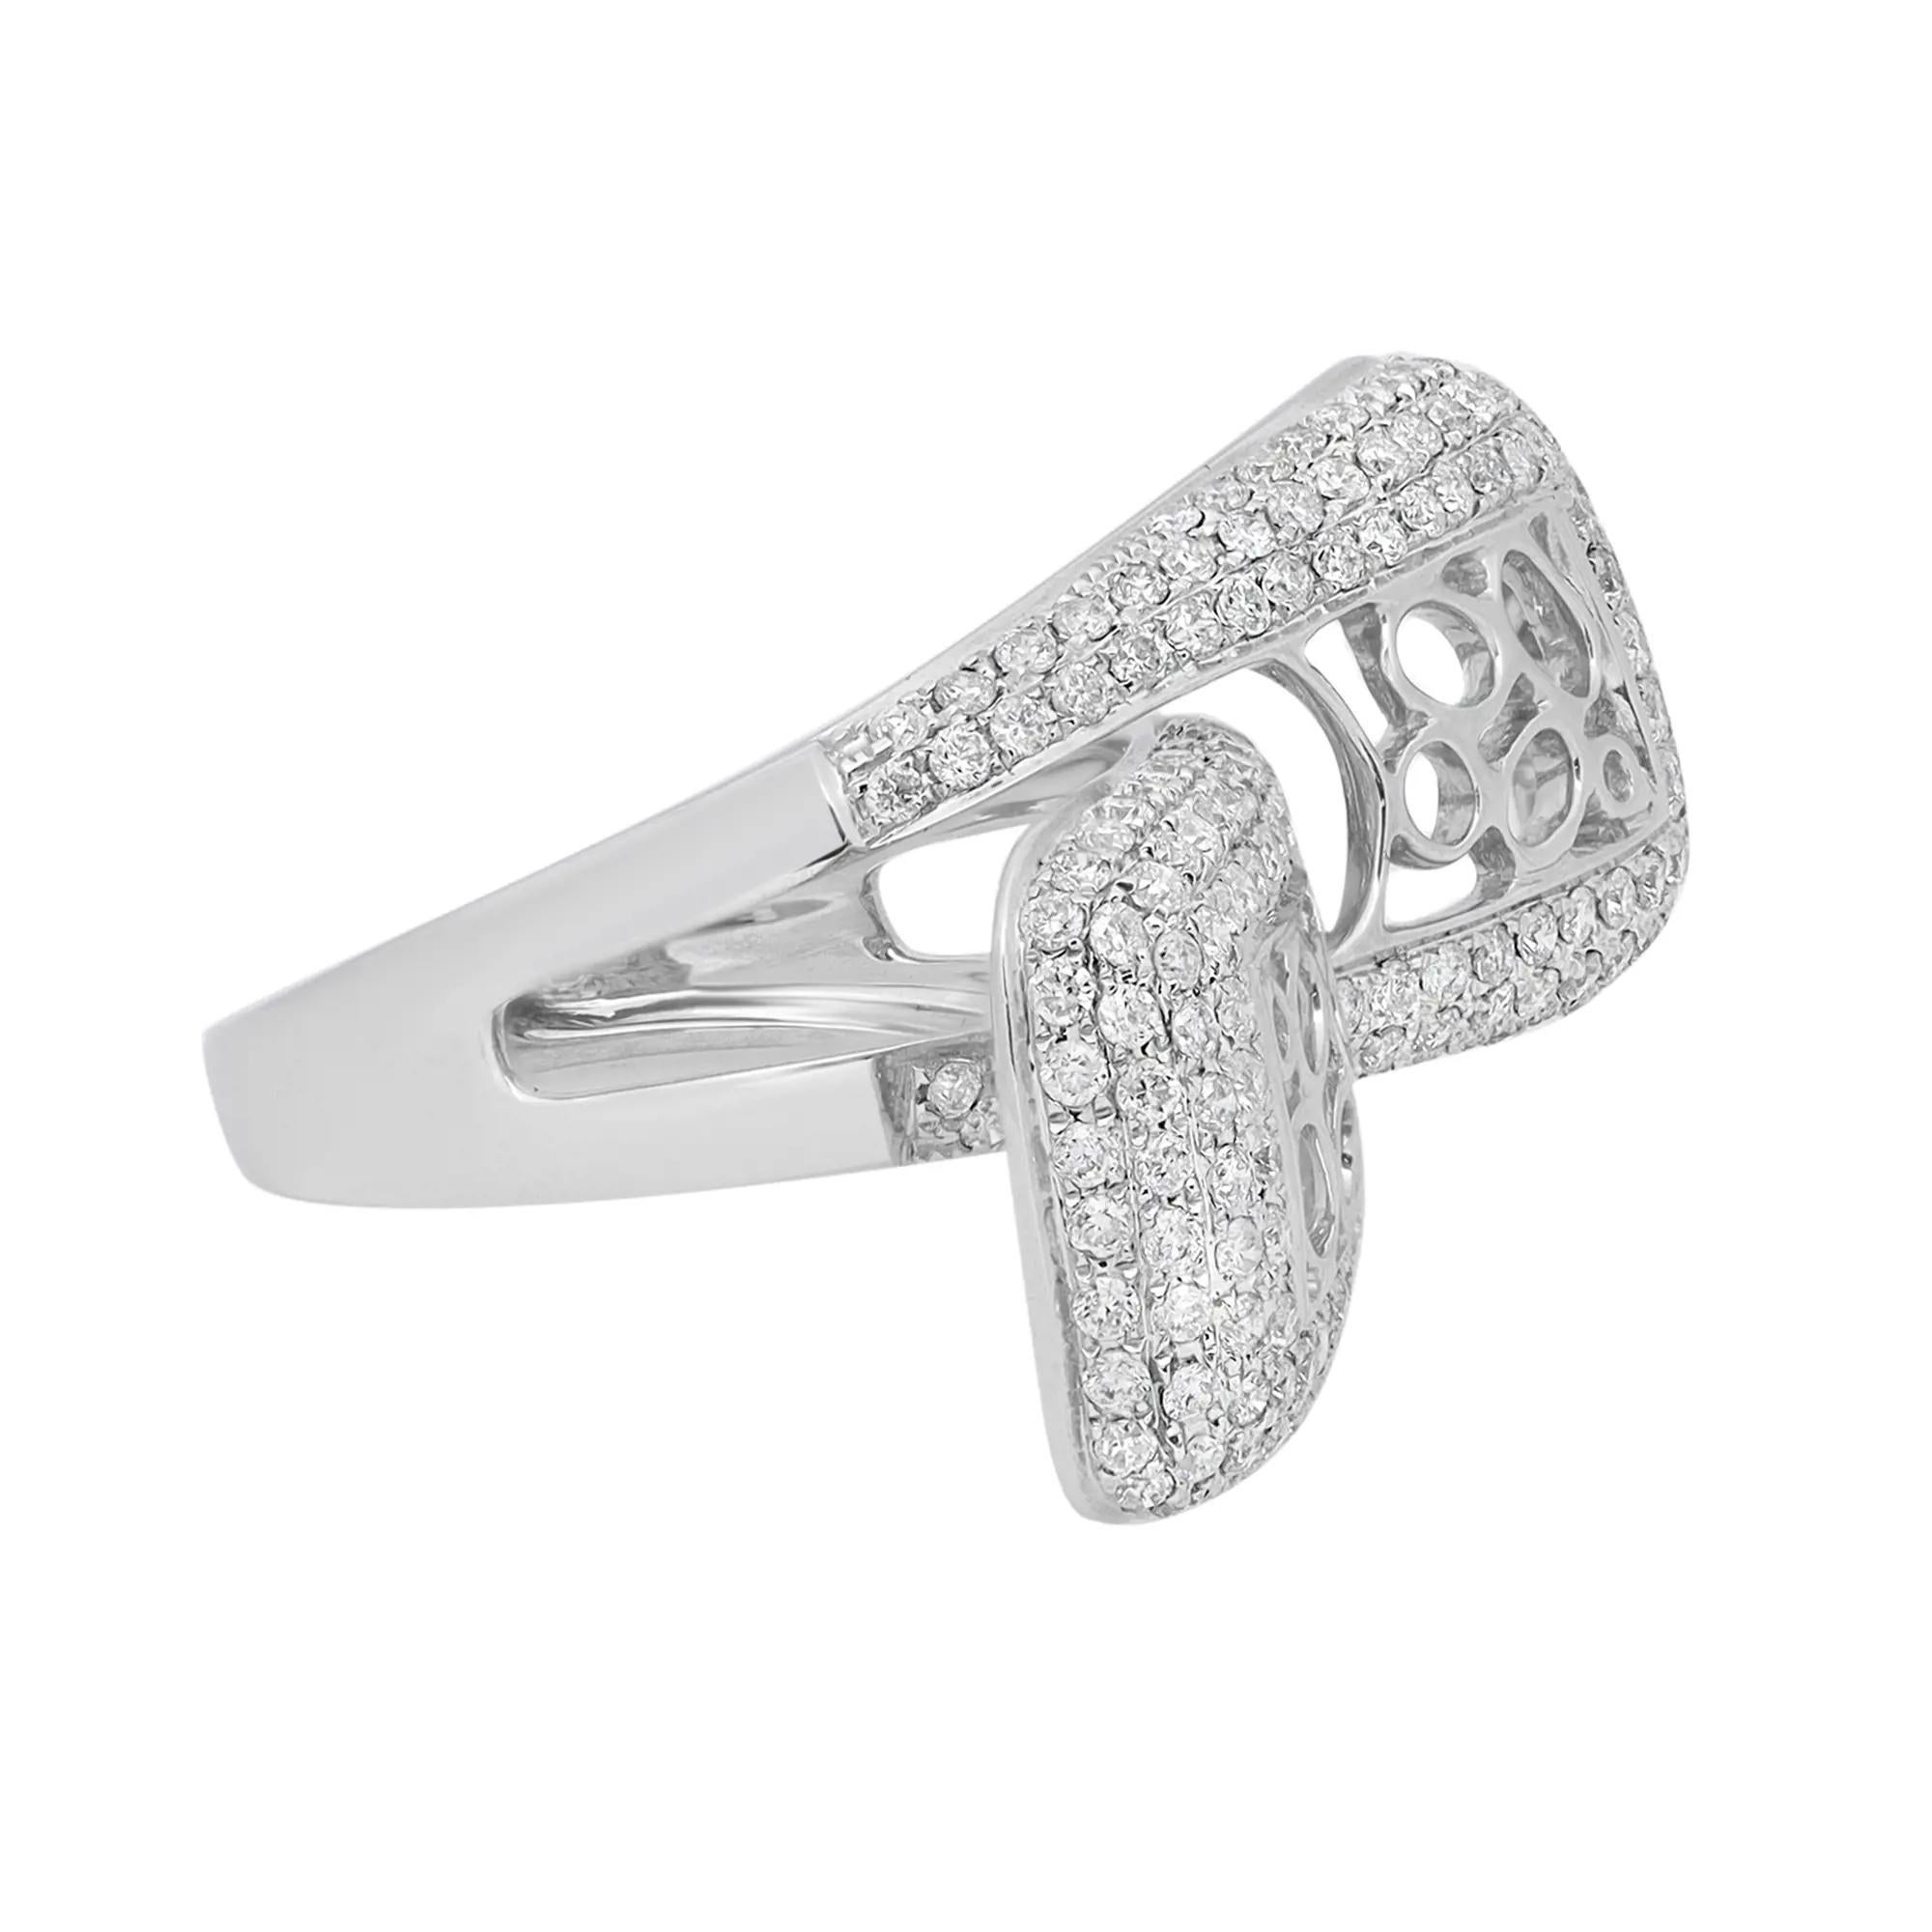 Round Cut 1.85cttw Pave Set Round Diamond Ladies Cocktail Ring 14k White Gold For Sale